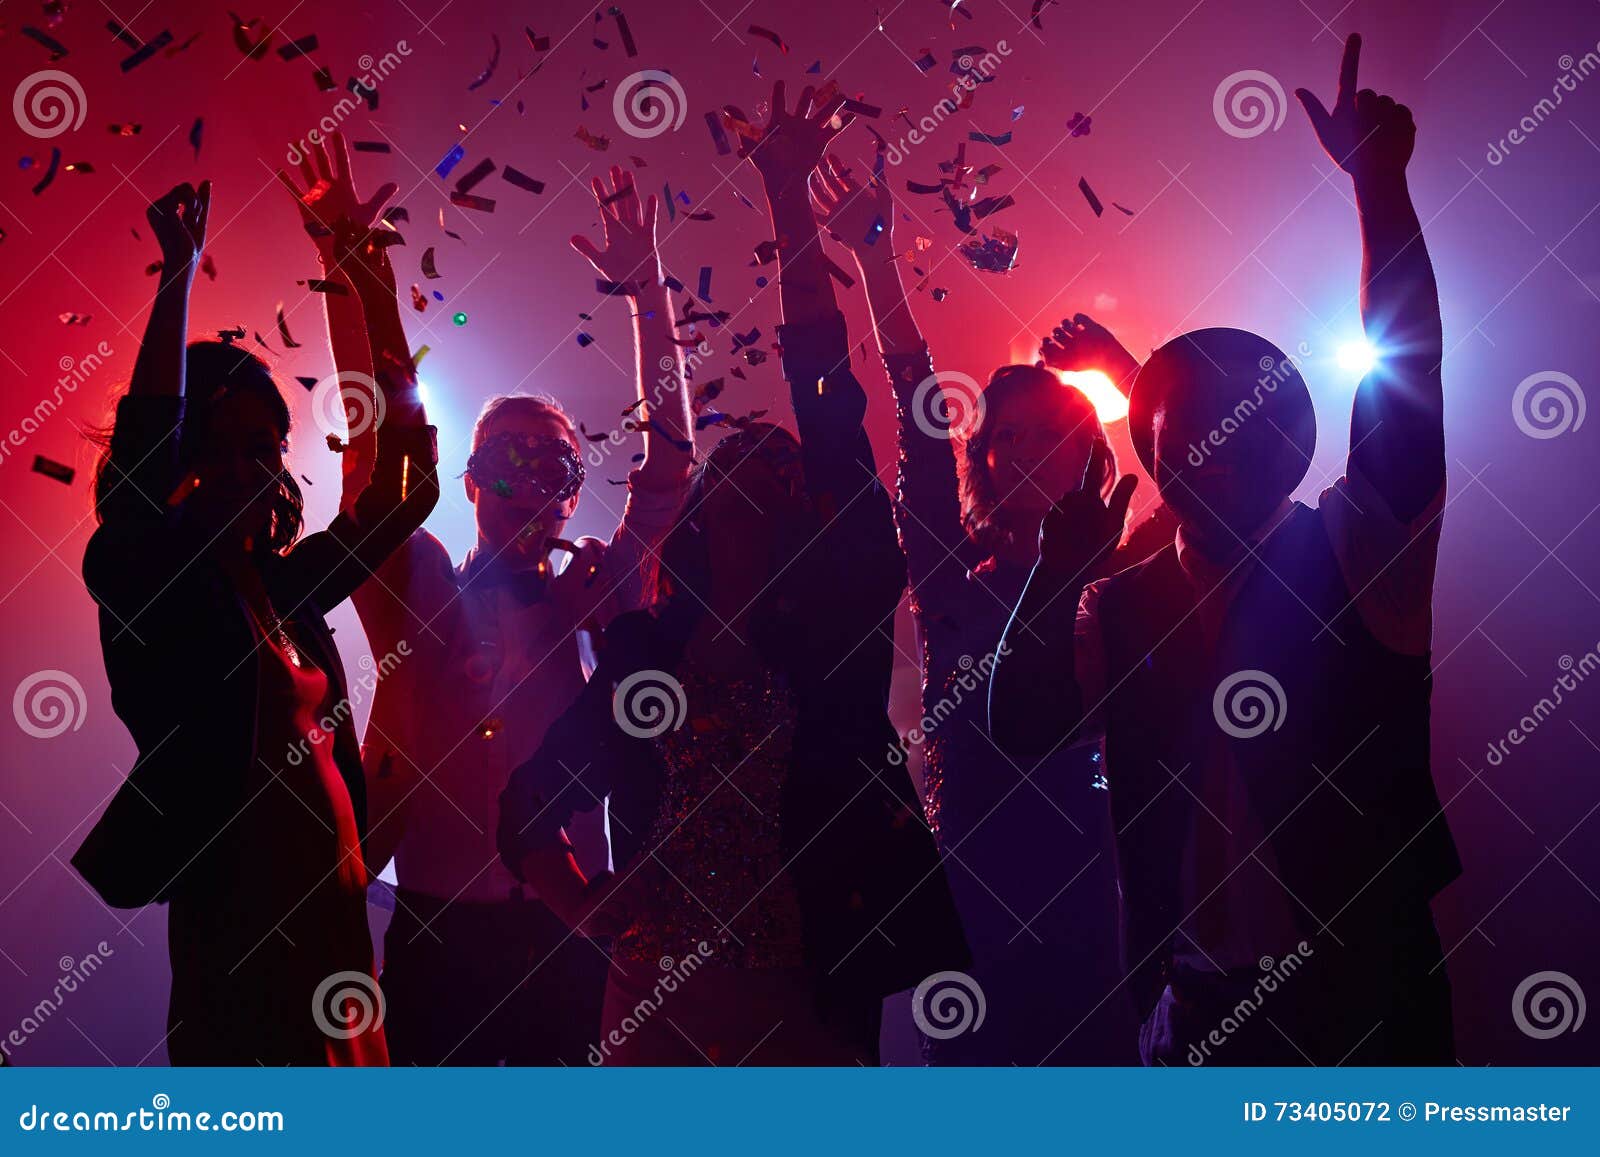 New year masquerade party stock photo. Image of happy - 73405072